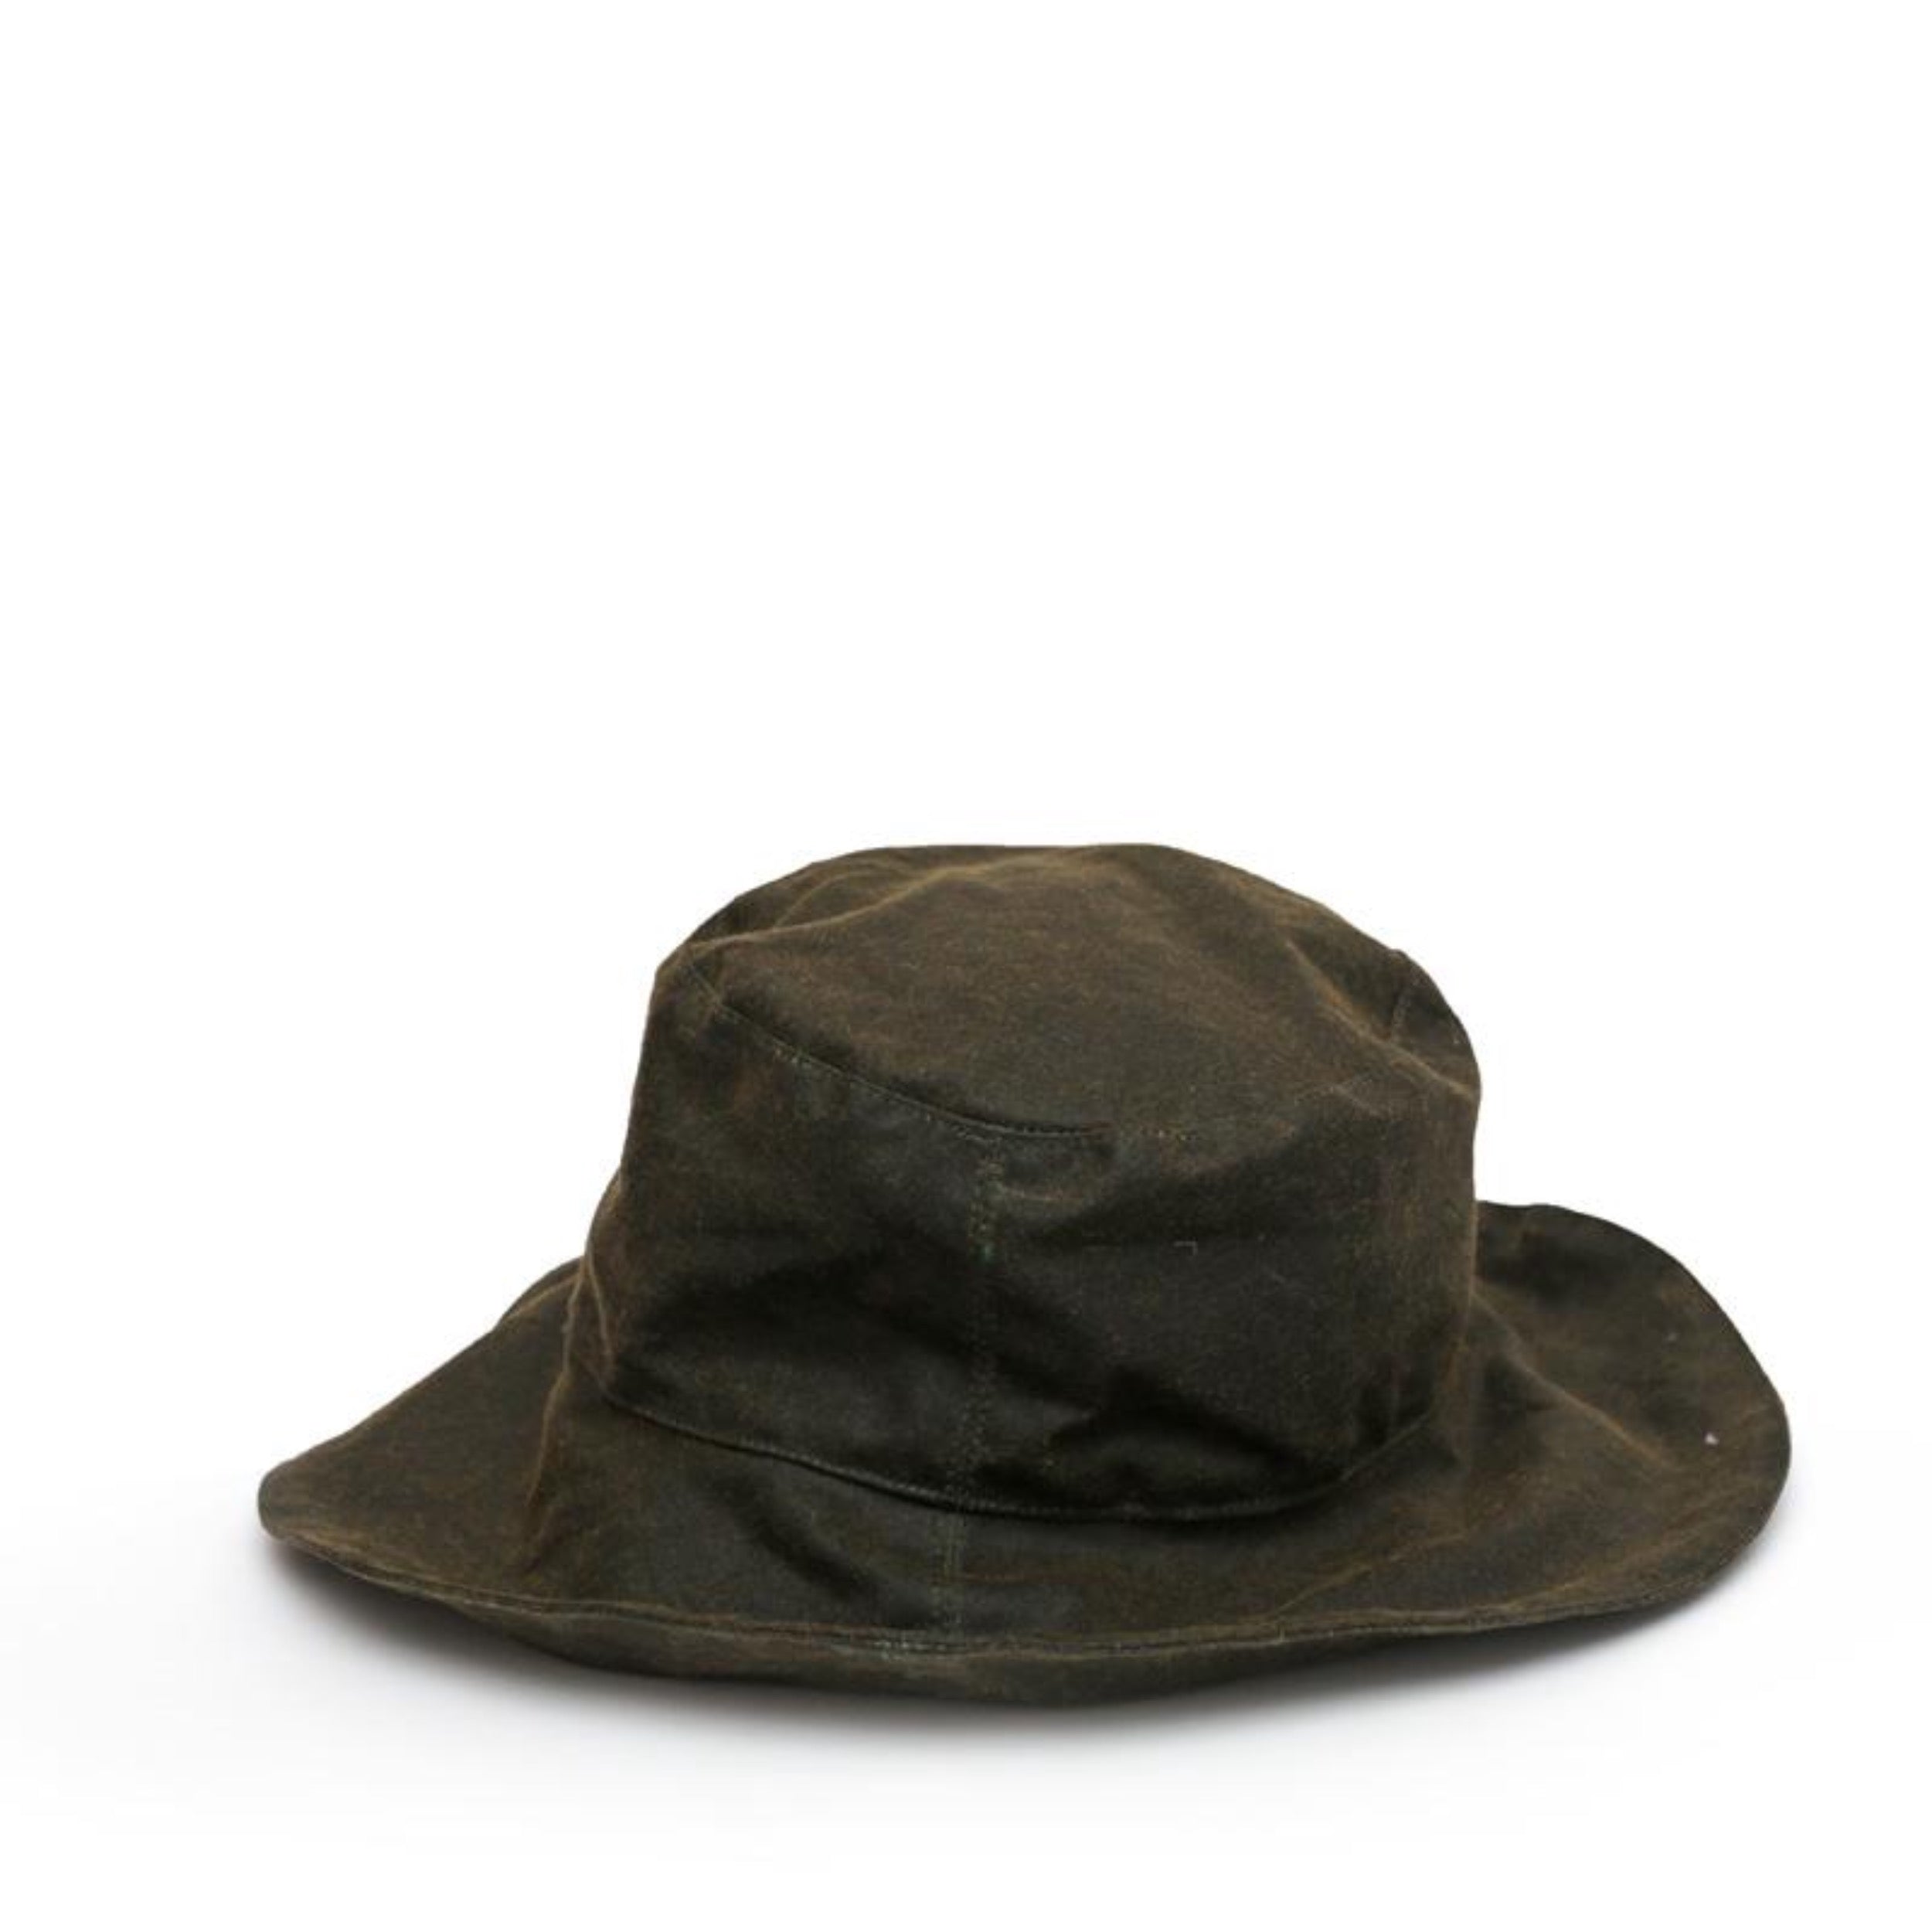 Carrier Company Waxed Cotton Hat in Olive